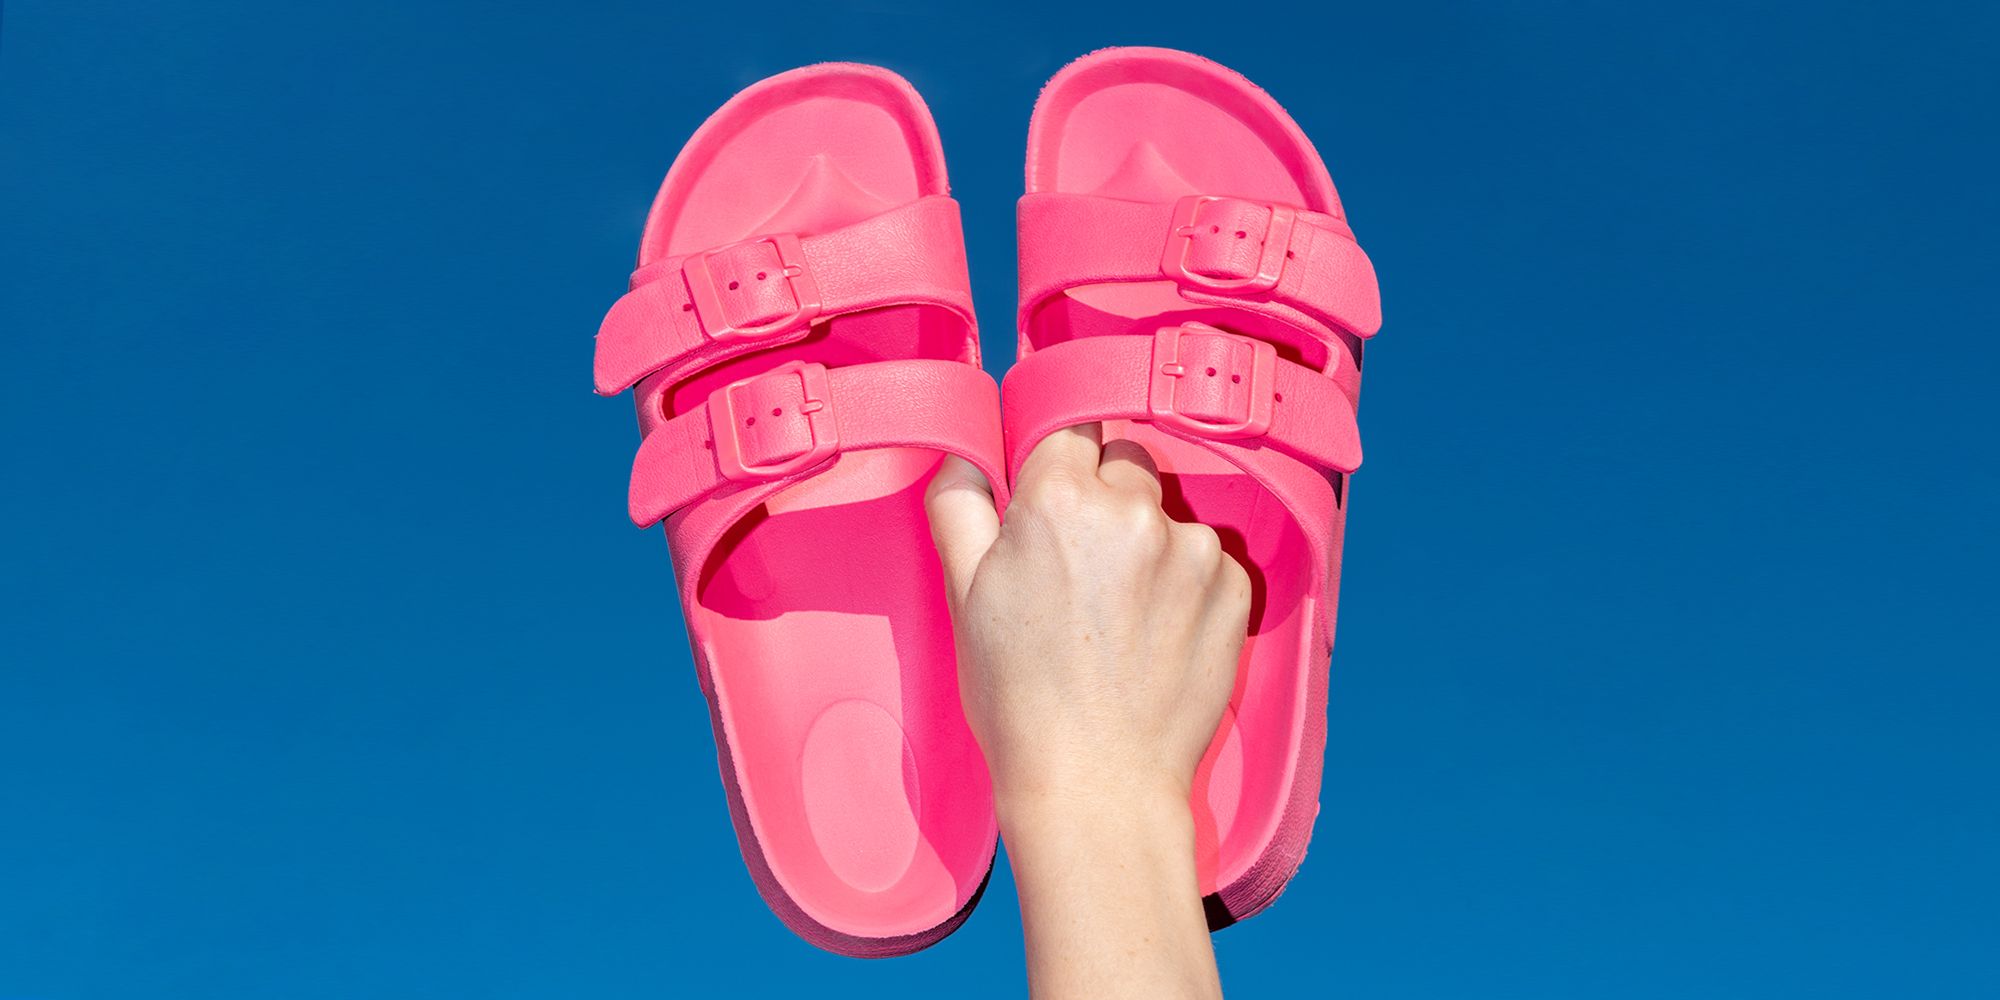 The prettiest sandals for summer!! #pink #haul #fypシ #girly